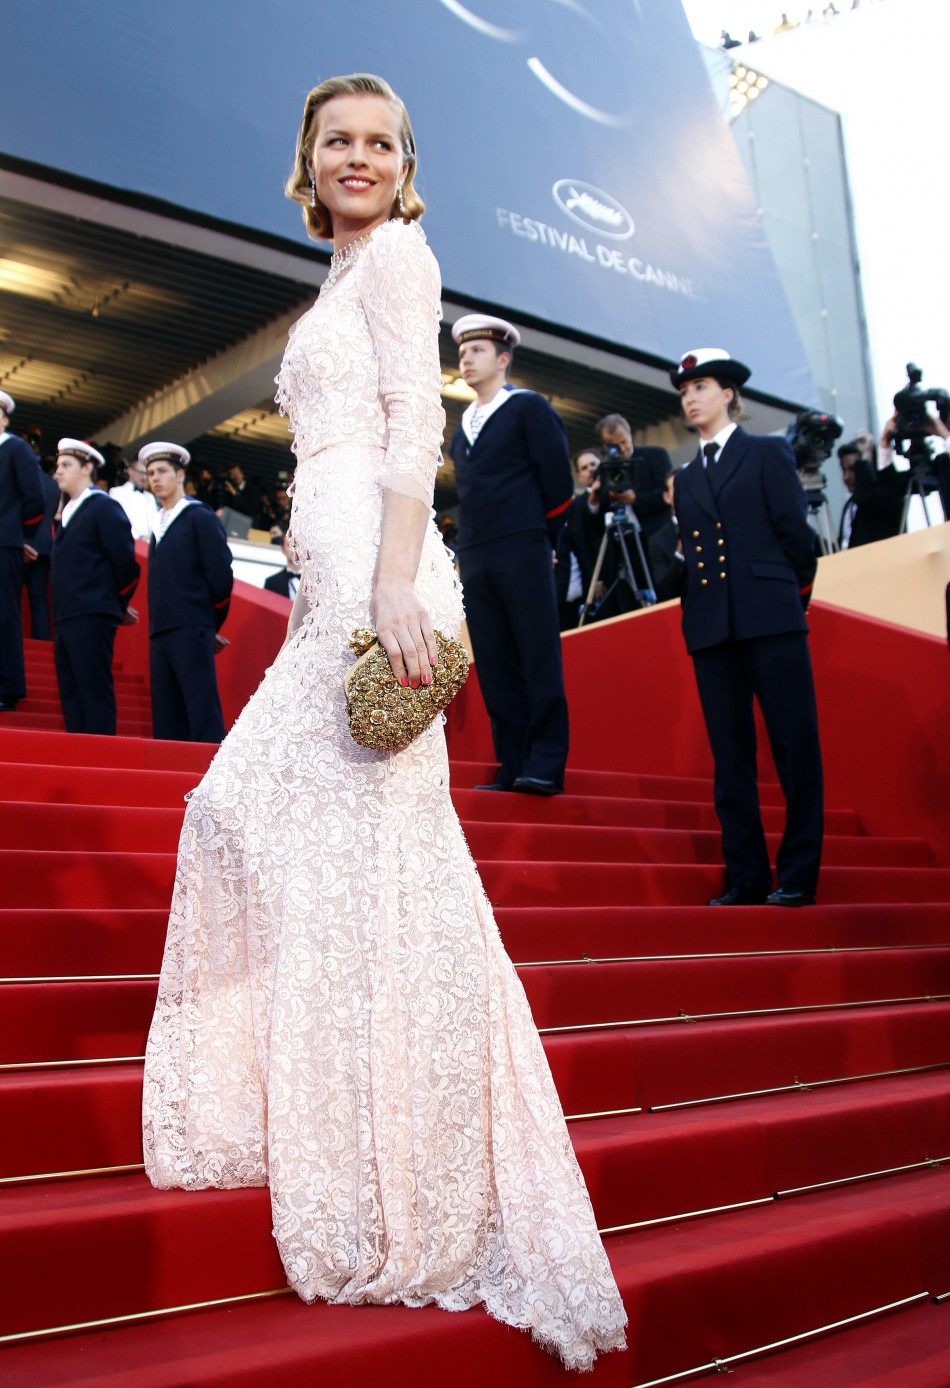 Czech model Herzigova arrives on the red carpet for the screening of the film Moonrise Kingdom in competition at the 65th Cannes Film Festival